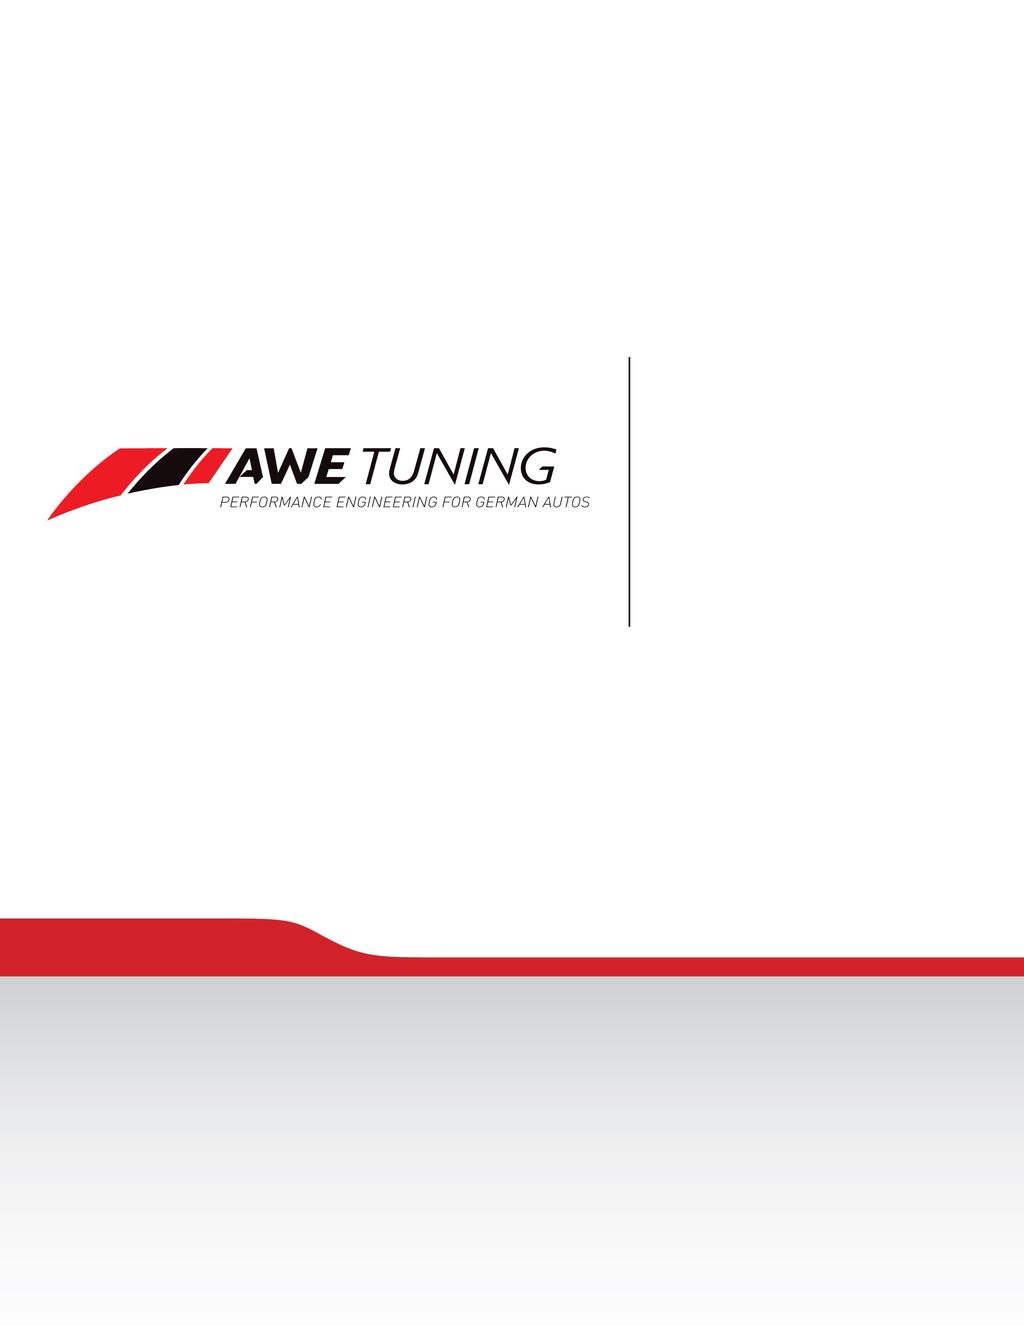 INSTALLATION GUIDE Congratulations on your purchase of the AWE Tuning Turbocharger Kit for the 2005-08